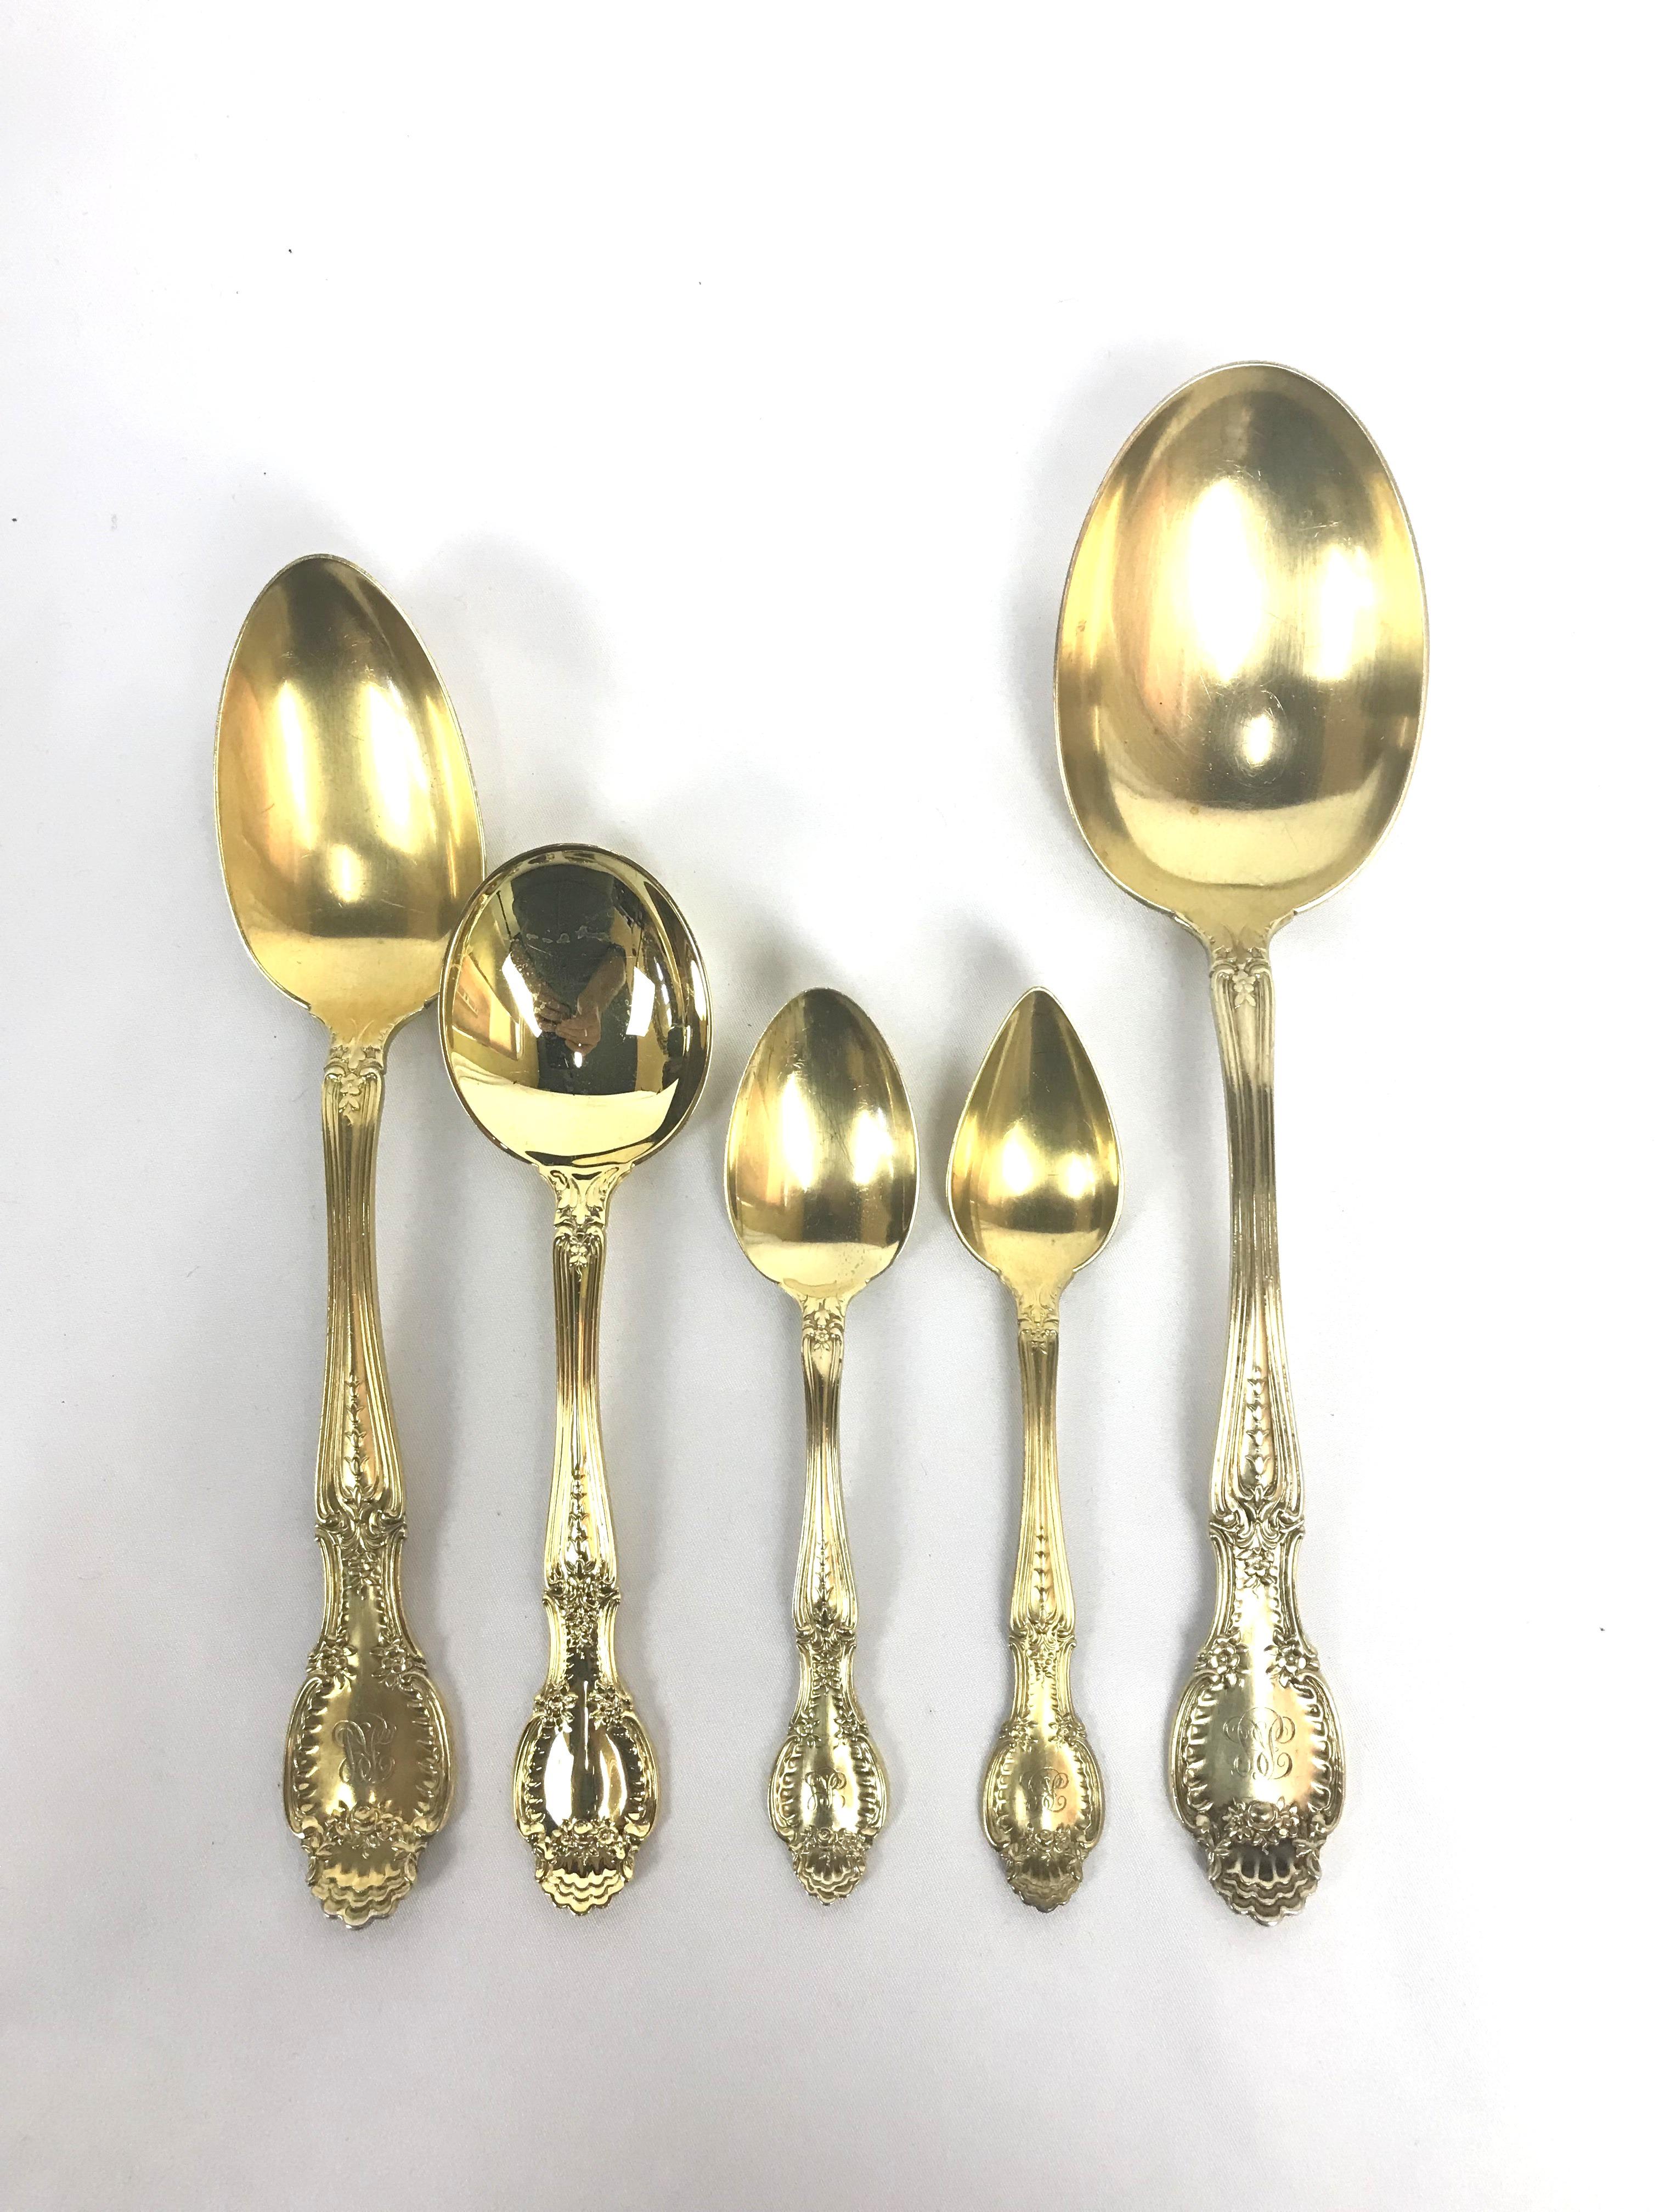 Richelieu Gold Vermeil by Tiffany Sterling Silver Flatware, 196 Pieces 2